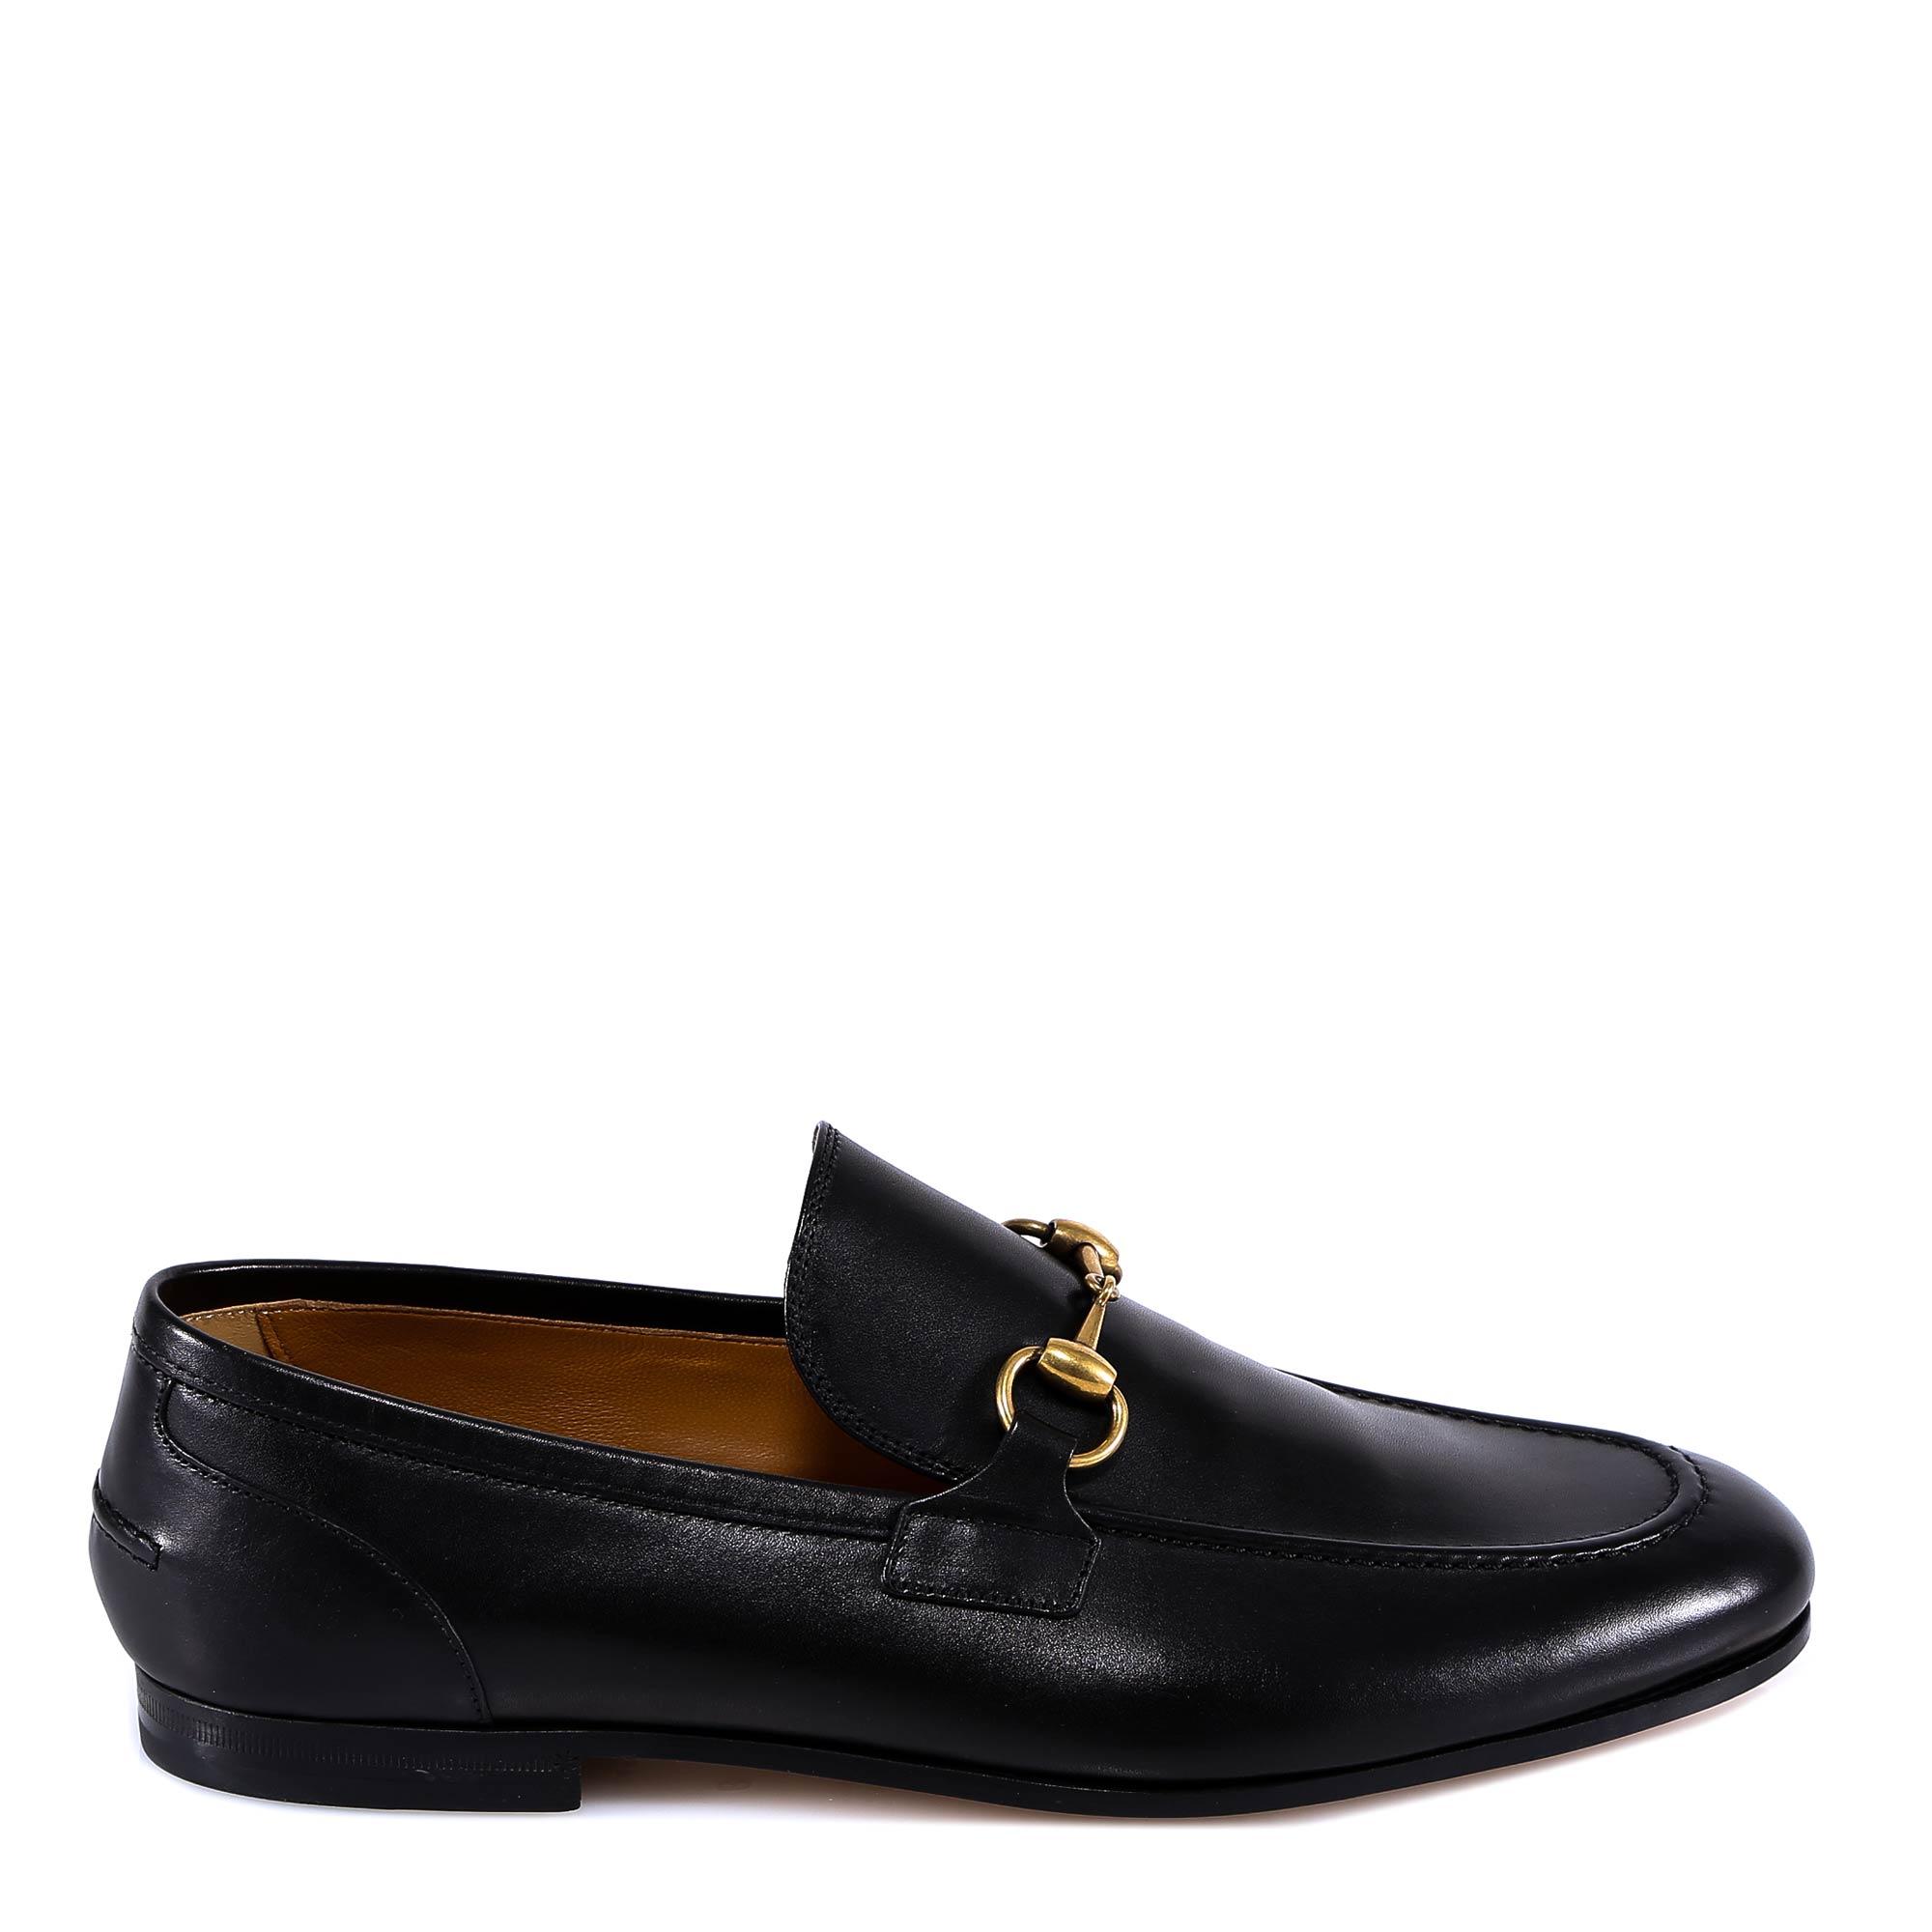 Gucci Leather Jordan Loafers in Black for Men - Save 6% - Lyst